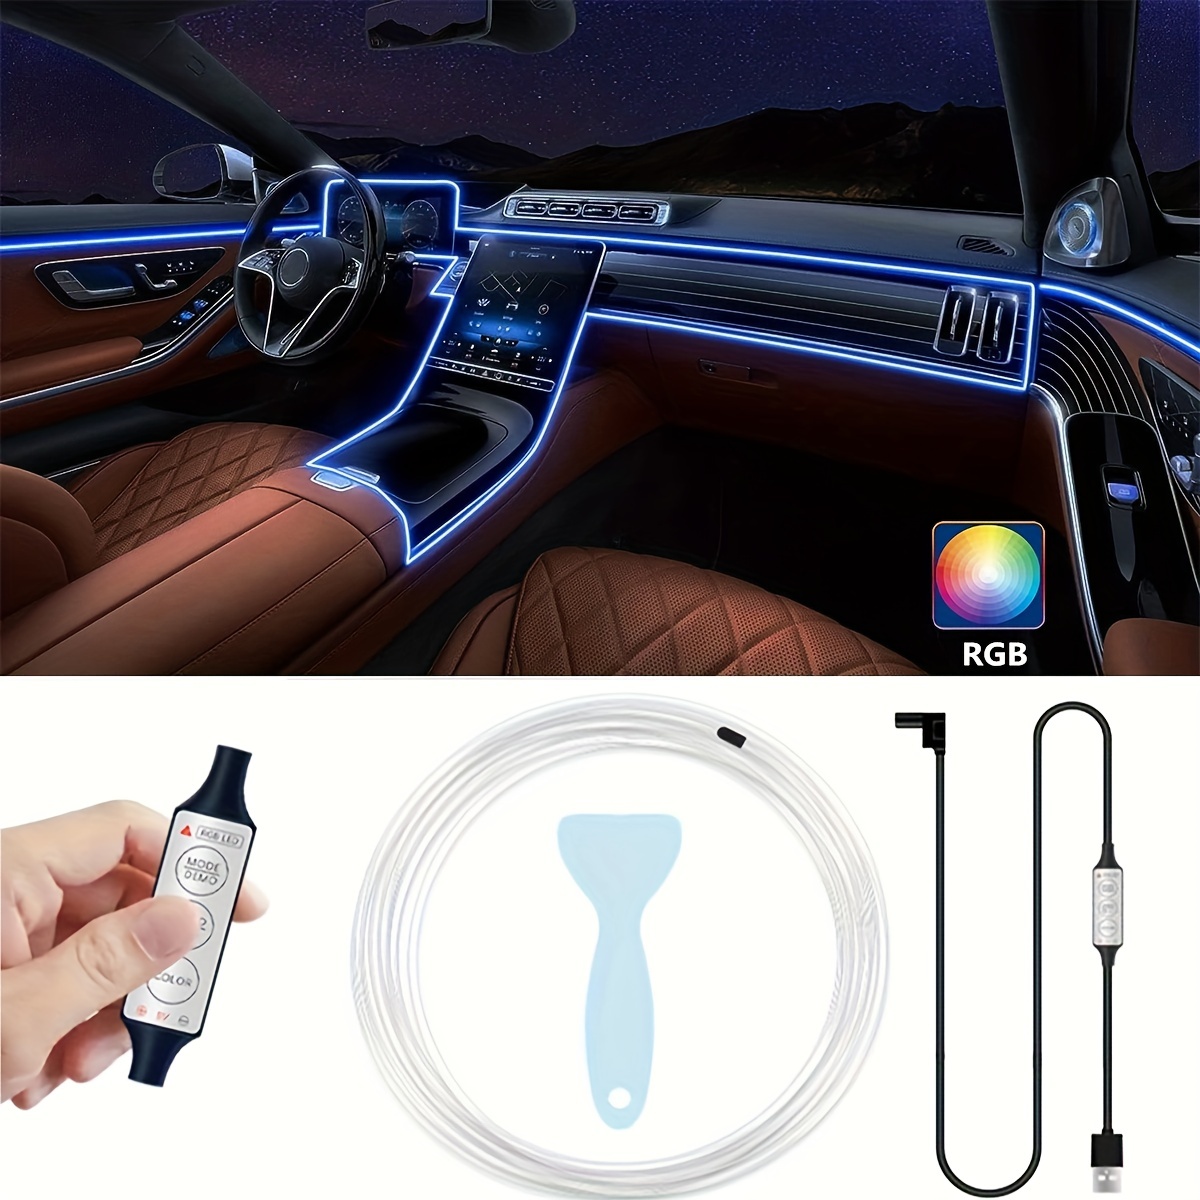 

196 Inch Neon Car Led Strip Light Rgb Usb Ambient Led Lighting Kit With Fiber Optic For Car Interior Accessories Center Console Dashboard Strip Lights